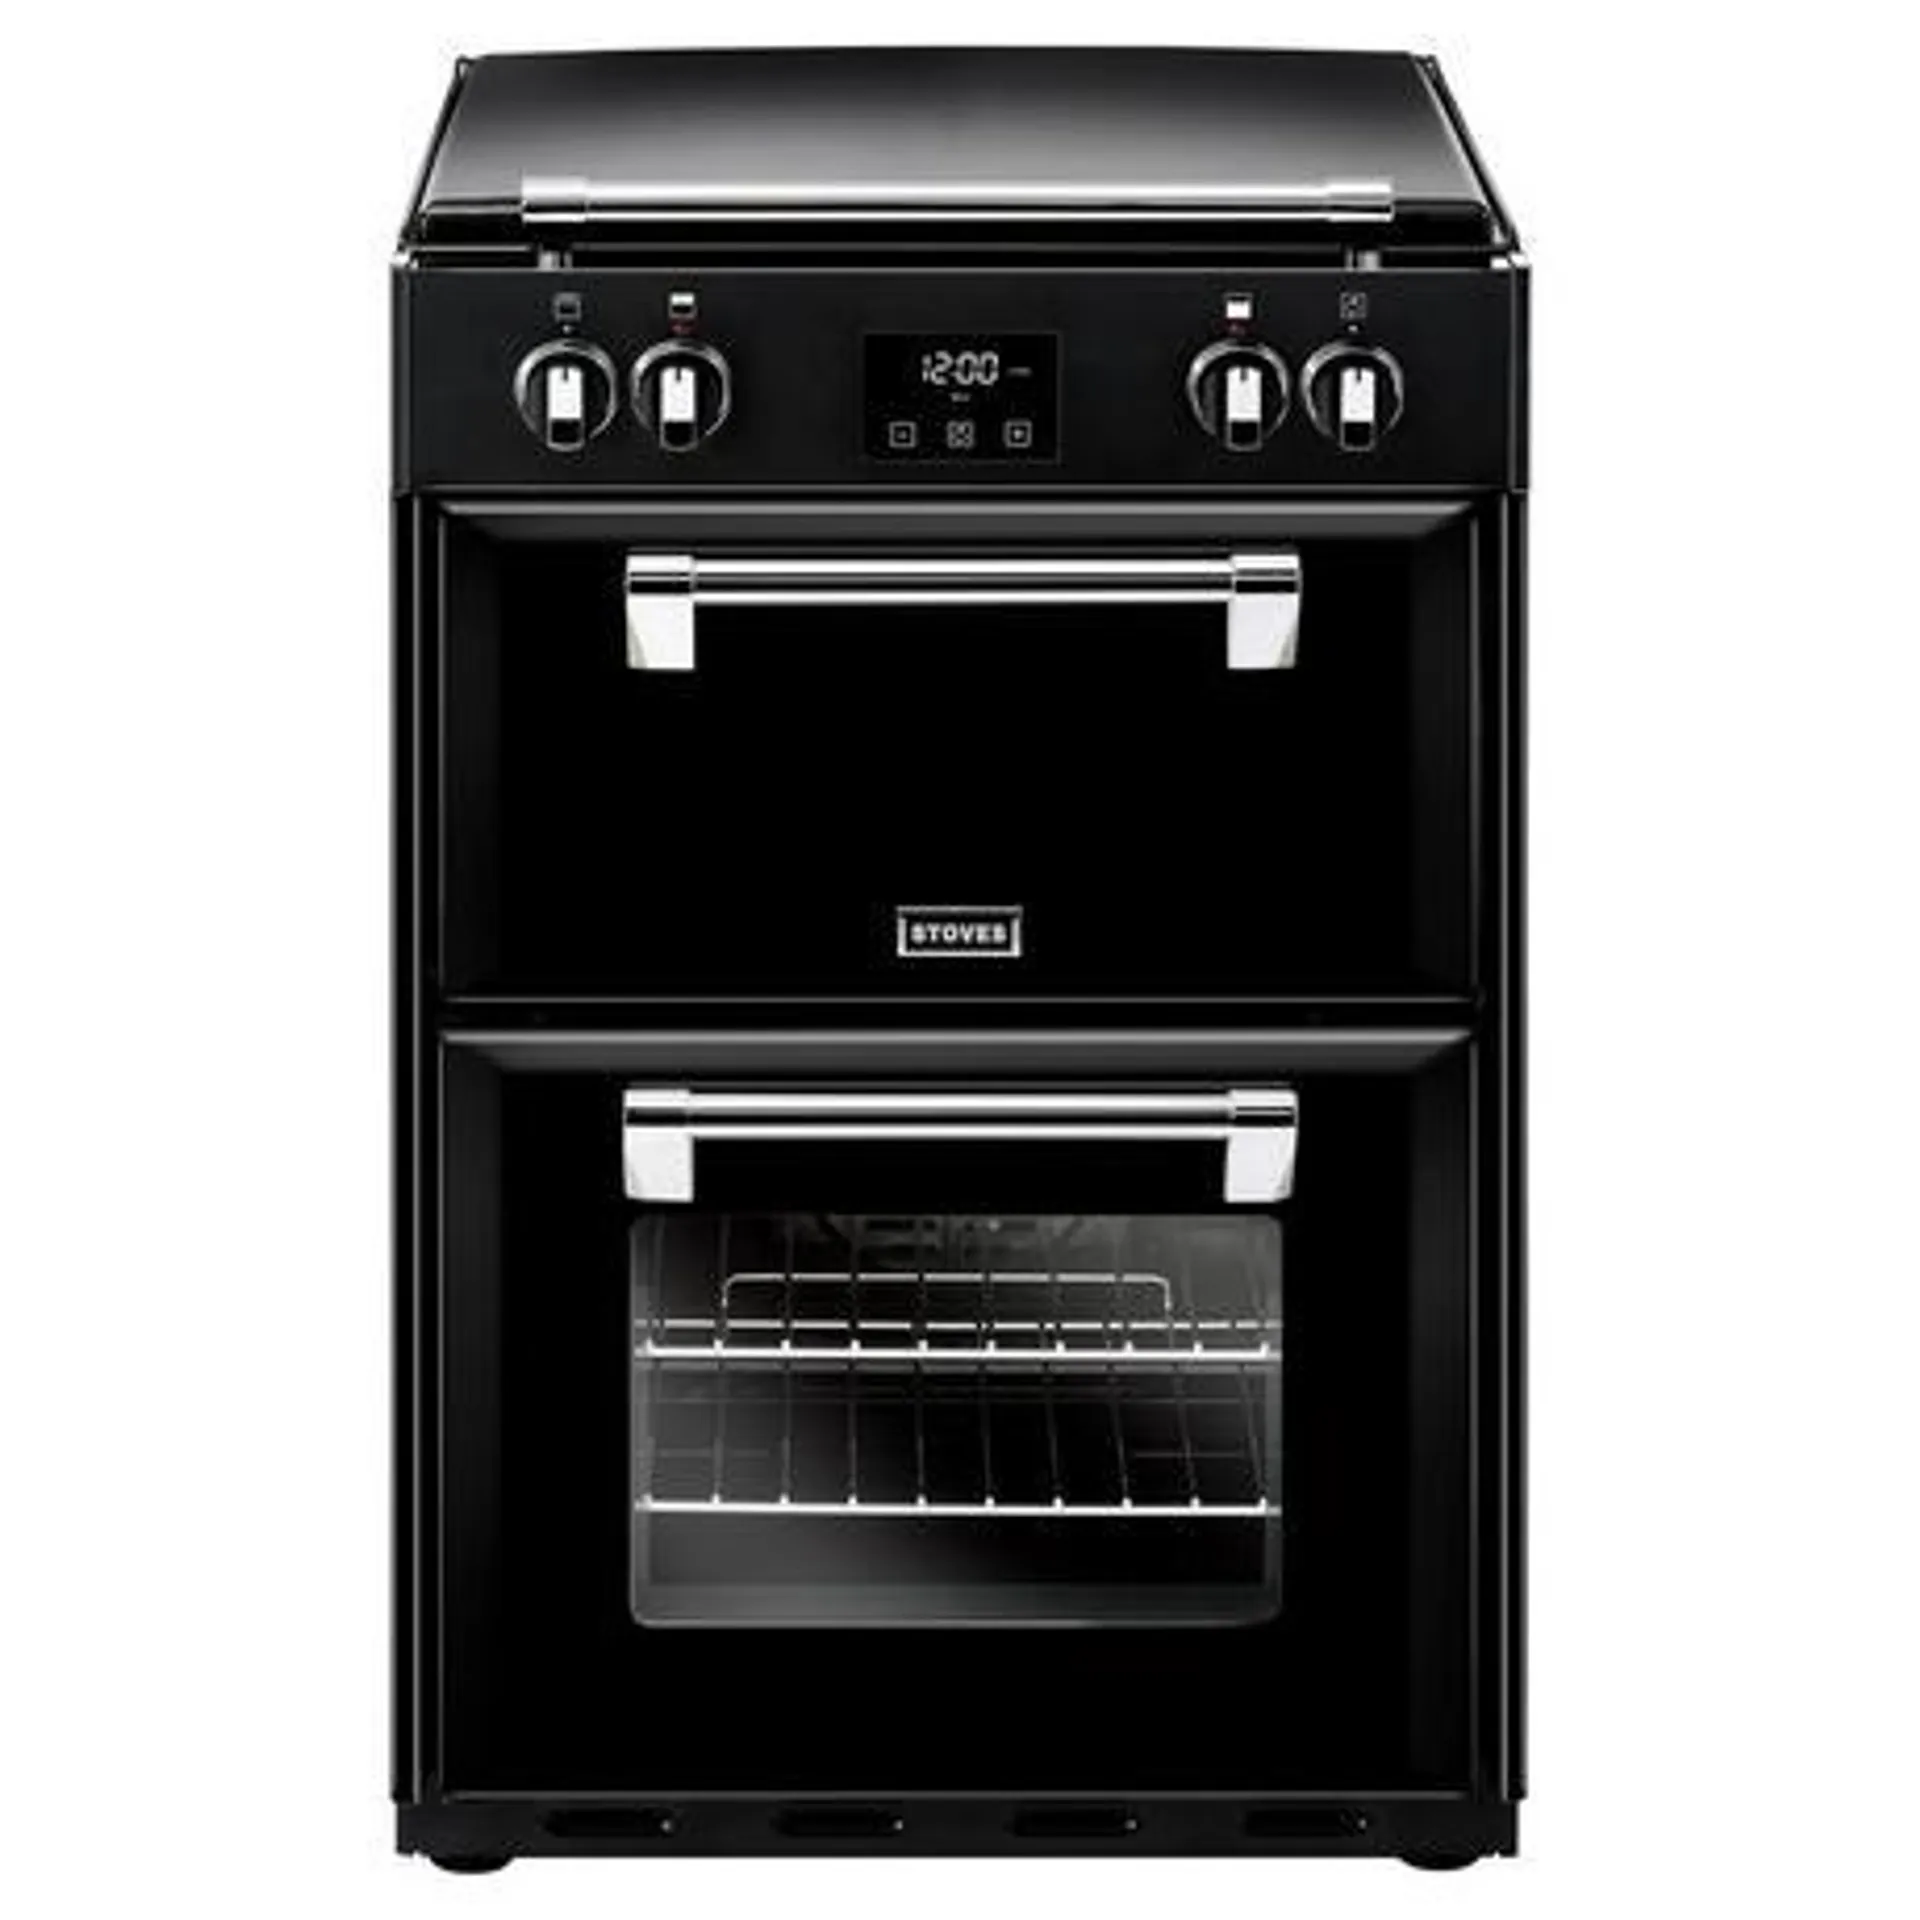 Stoves 444444729 Richmond 600EI Induction Double Oven Cooker